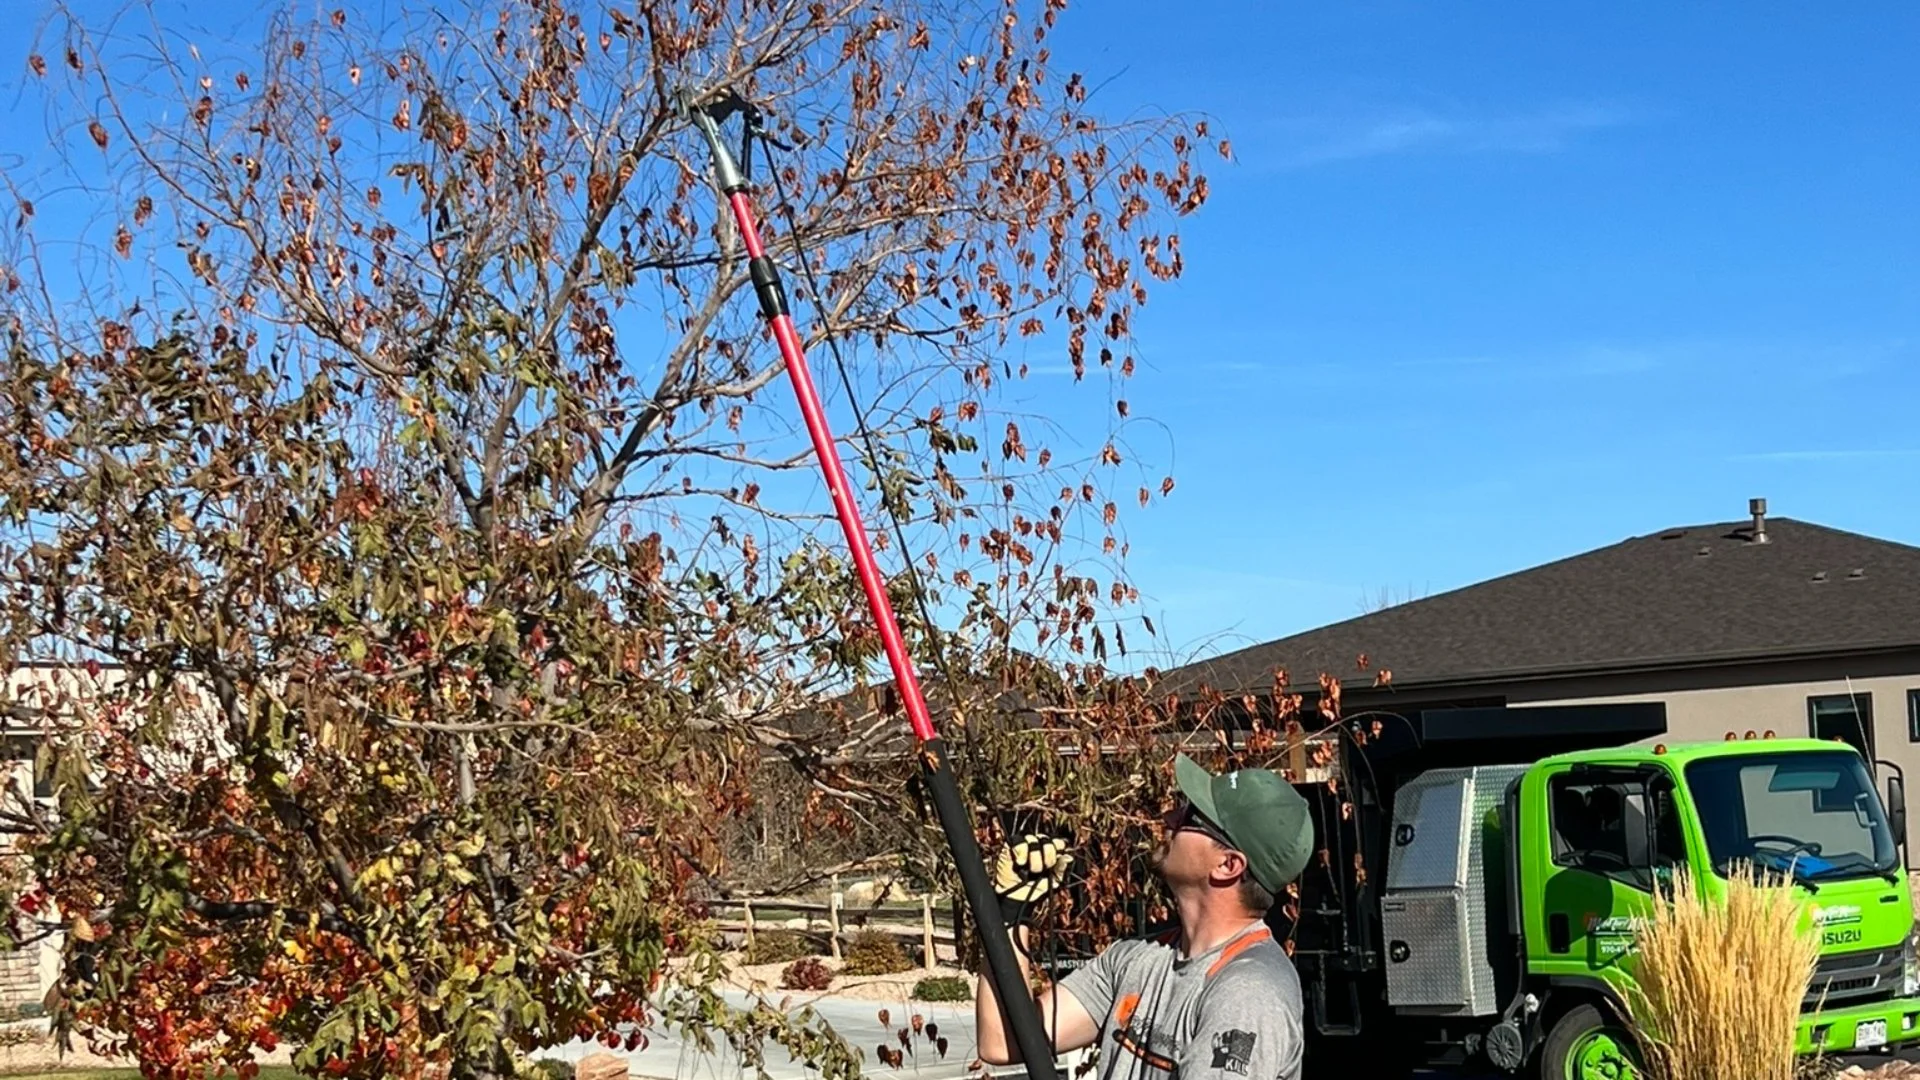 Trimming vs Pruning - Is There Any Difference Between Them?